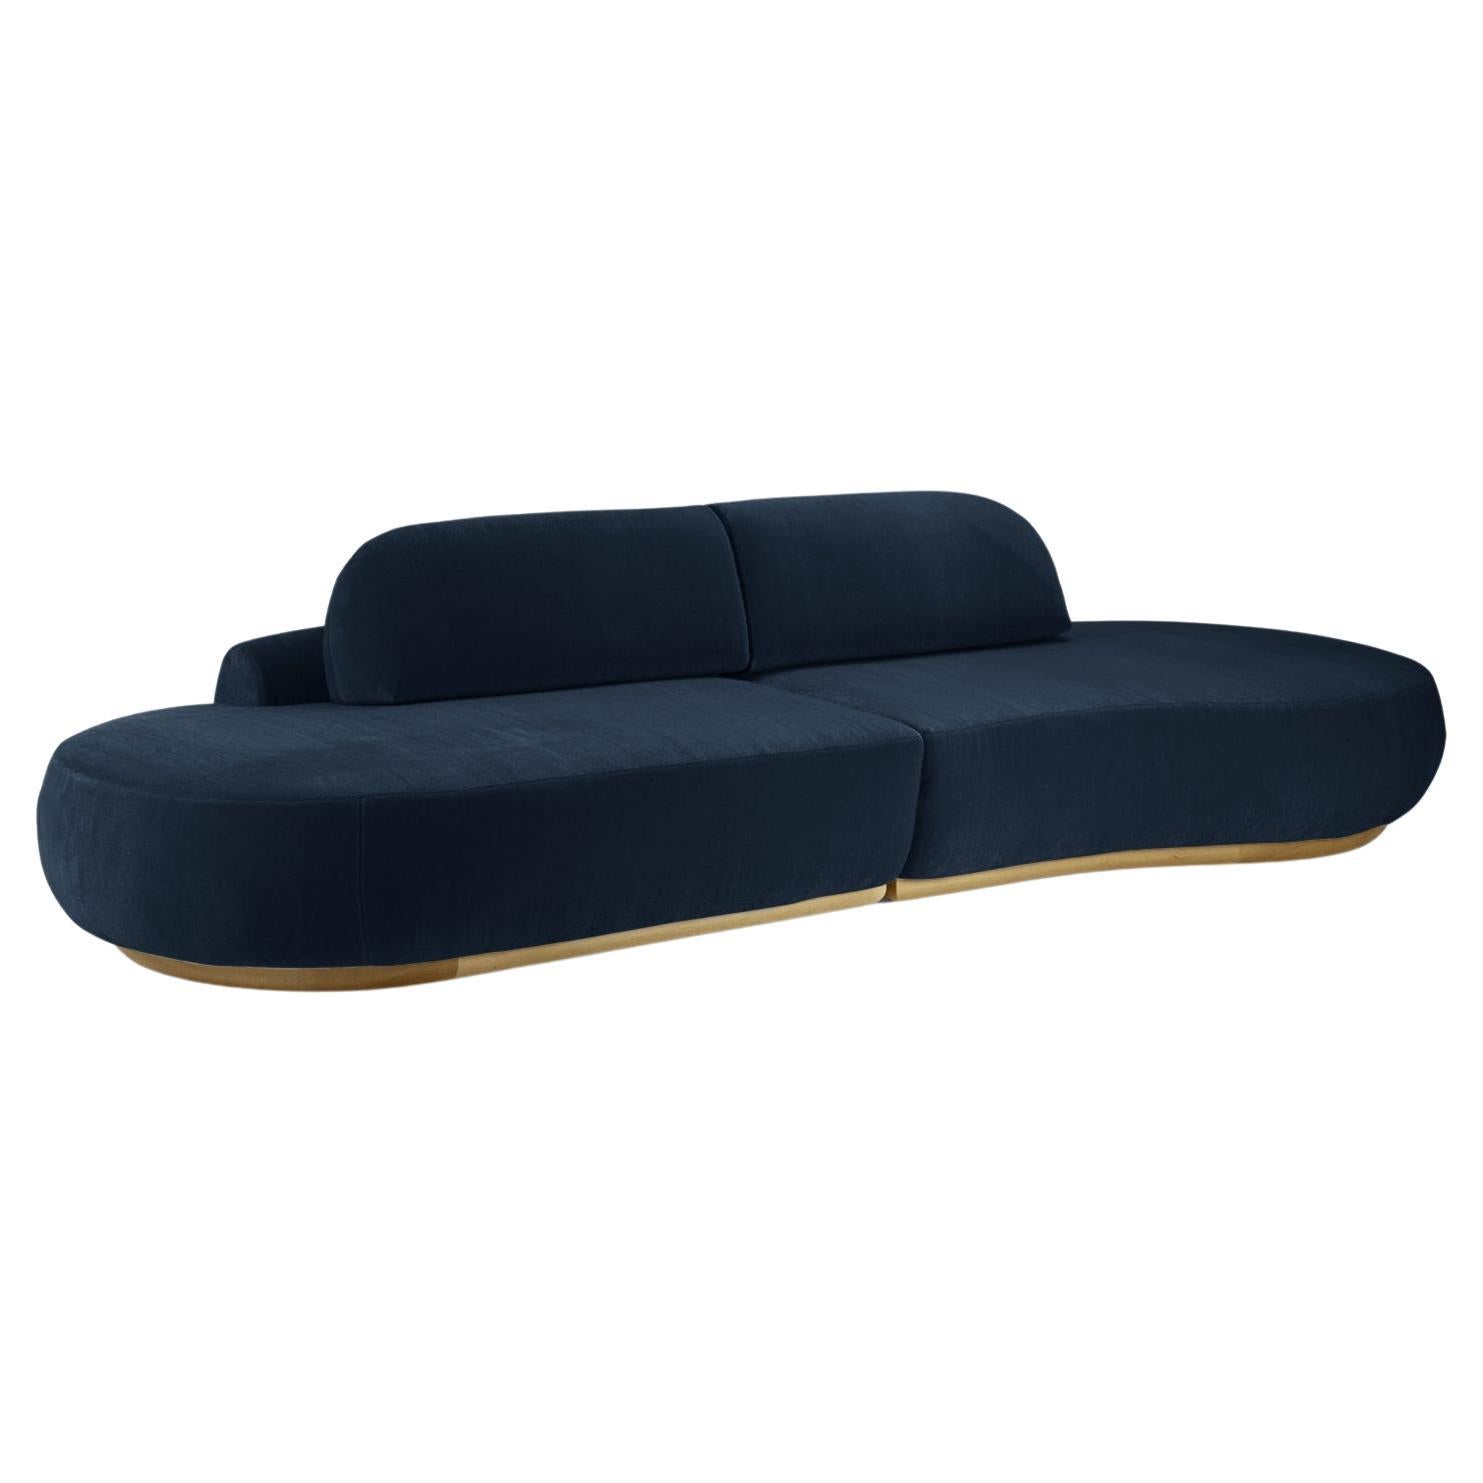 Naked Curved Sectional Sofa, 2 Piece with Natural Oak and Paris Black For Sale